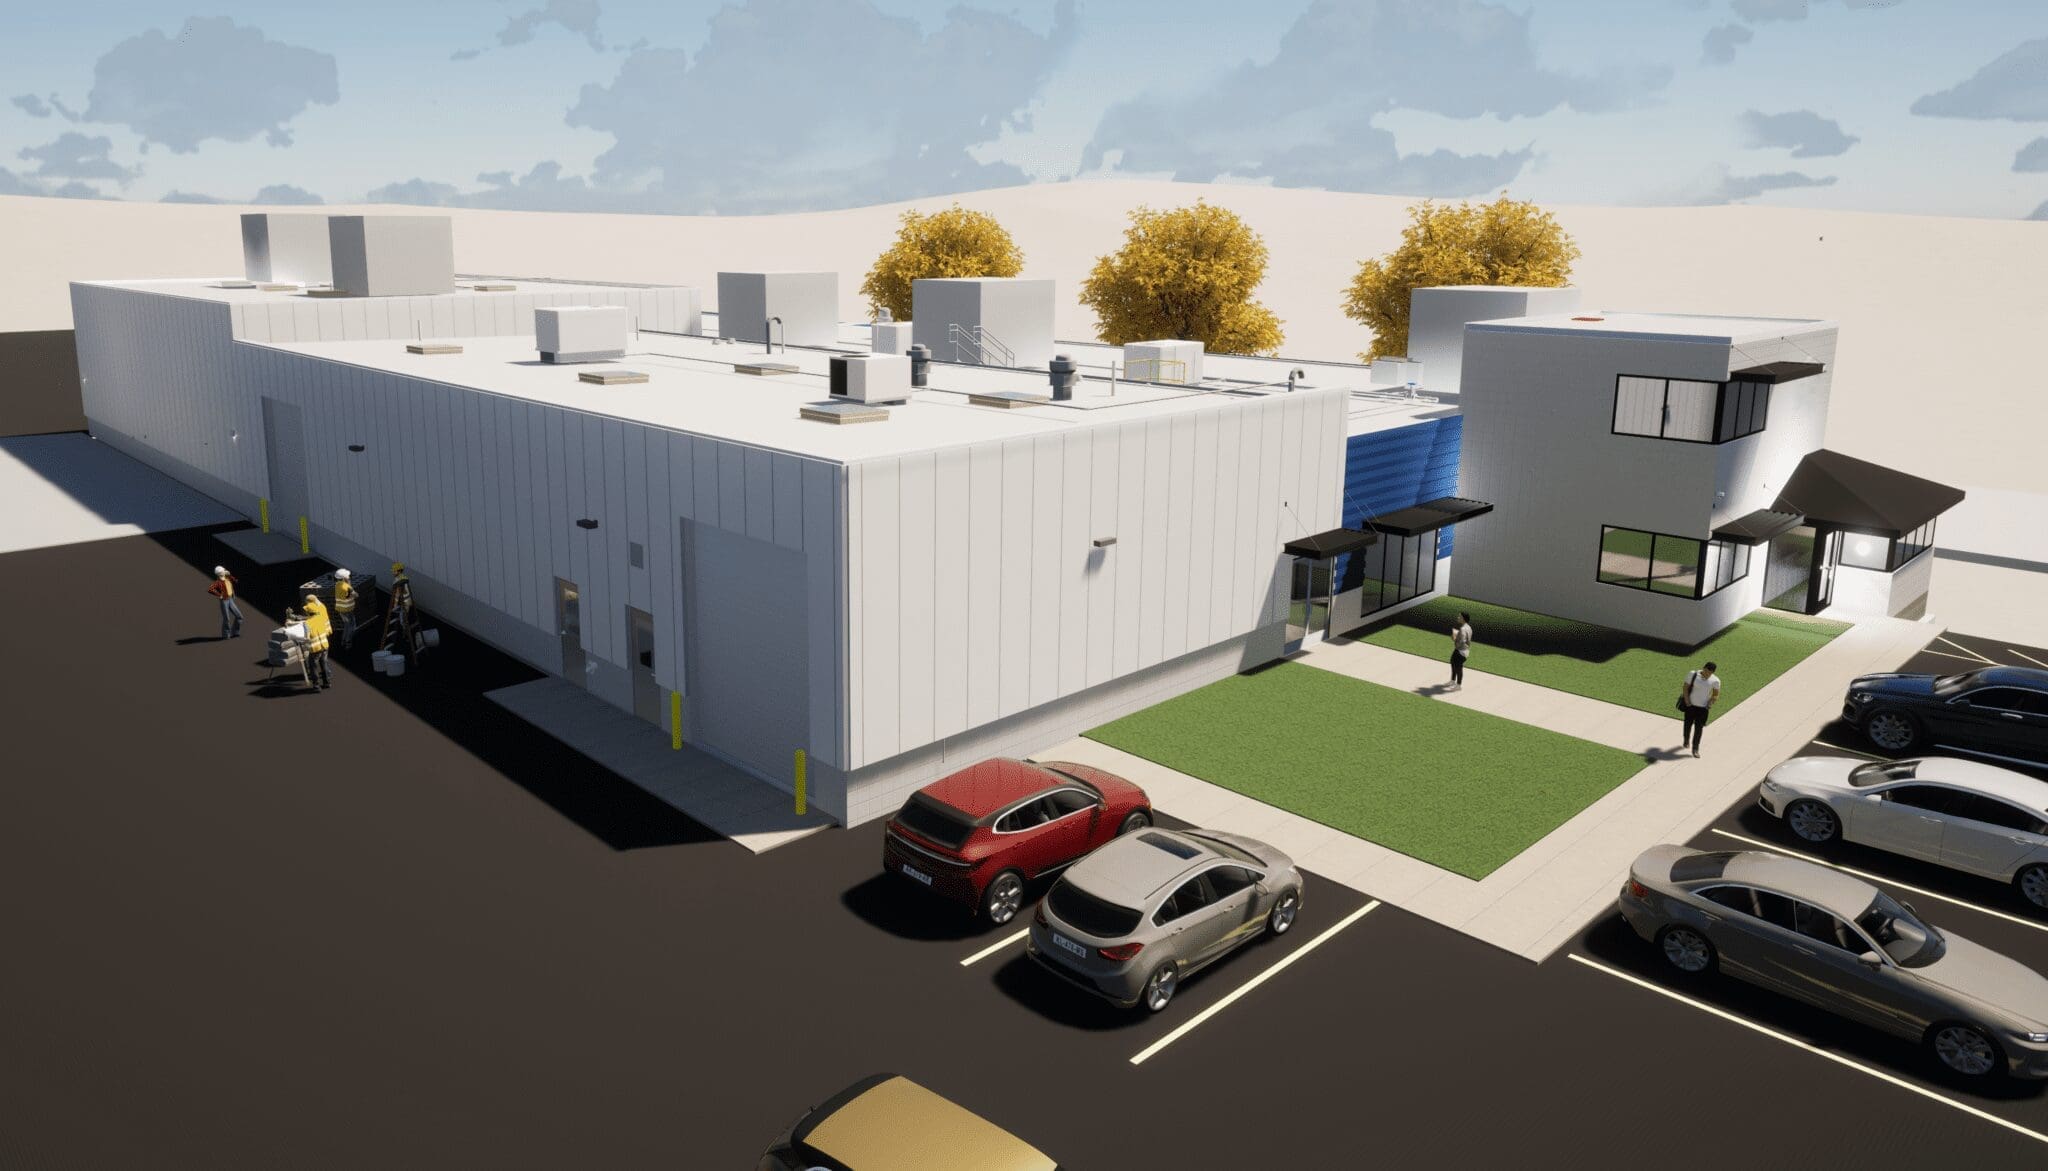 3D rendering Dan Vos Construction created to model out the WMCI facilities expansion.